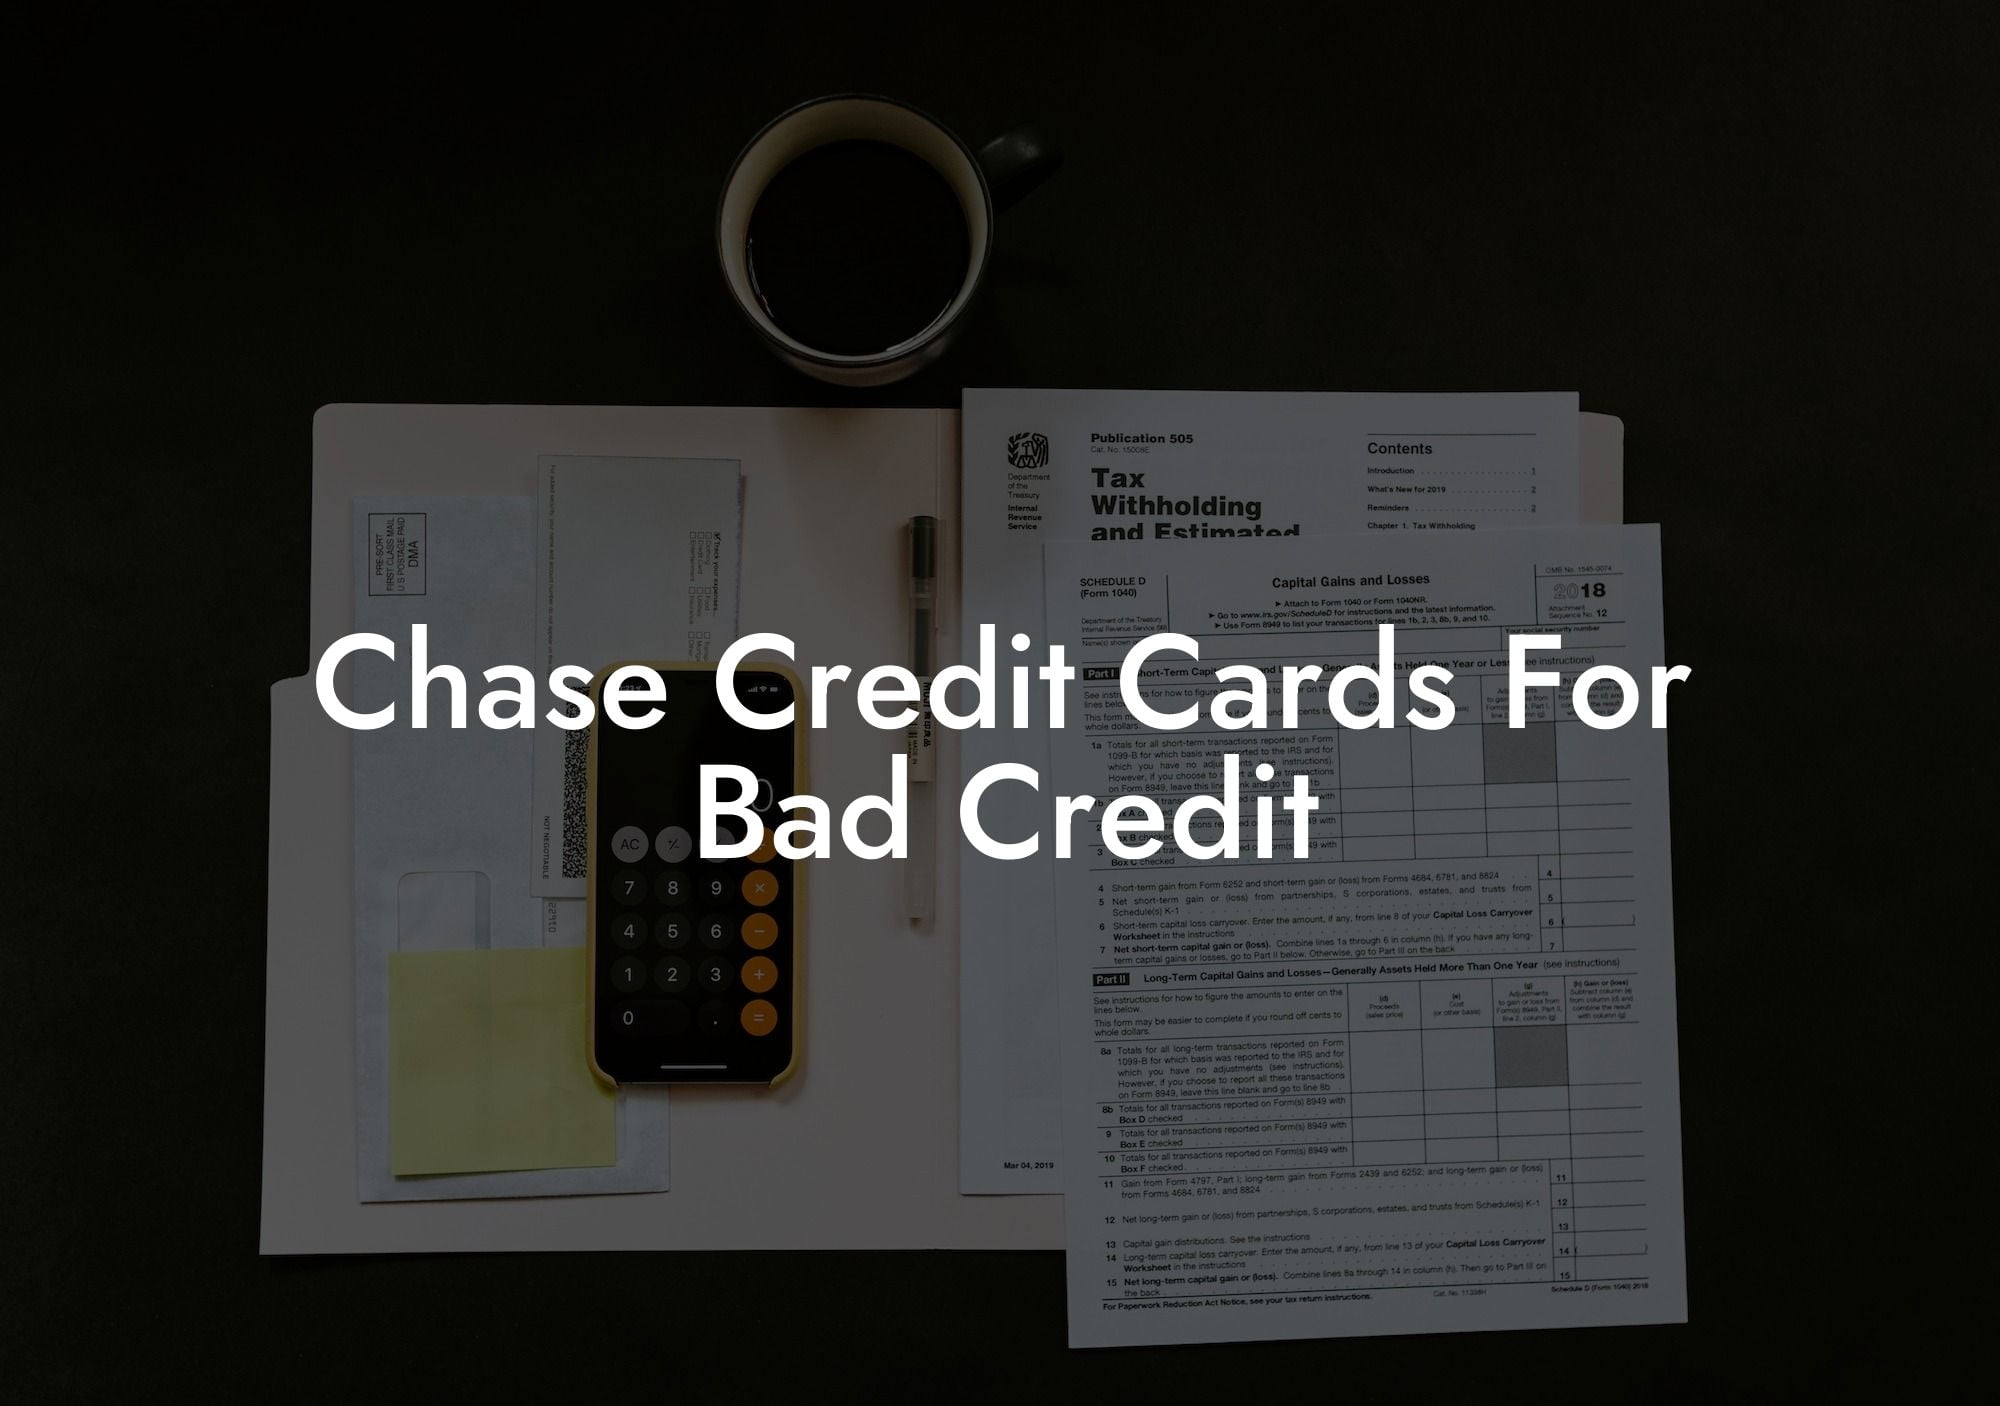 Chase Credit Cards For Bad Credit